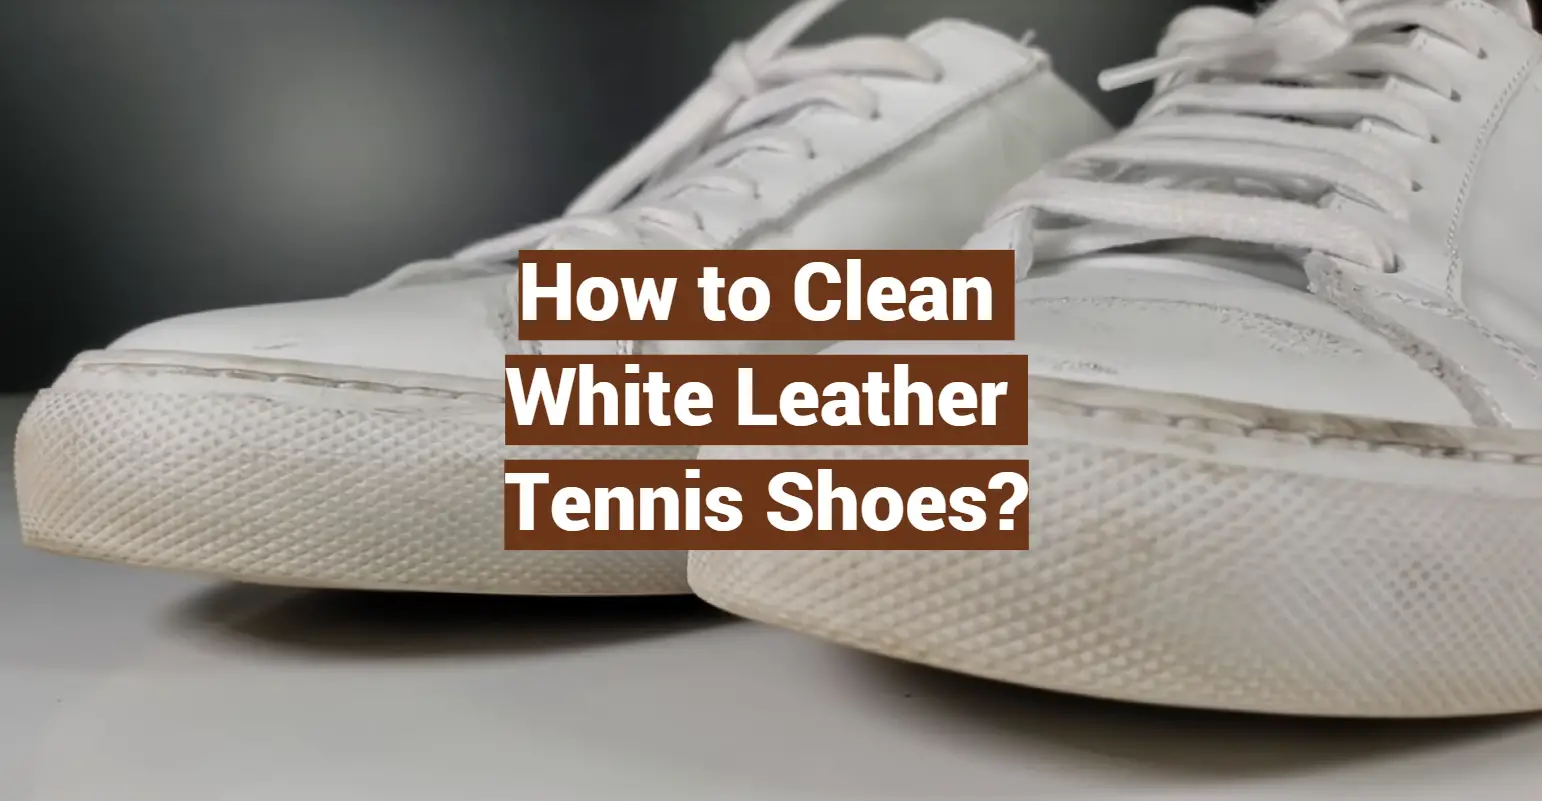 How to Clean White Leather Tennis Shoes?